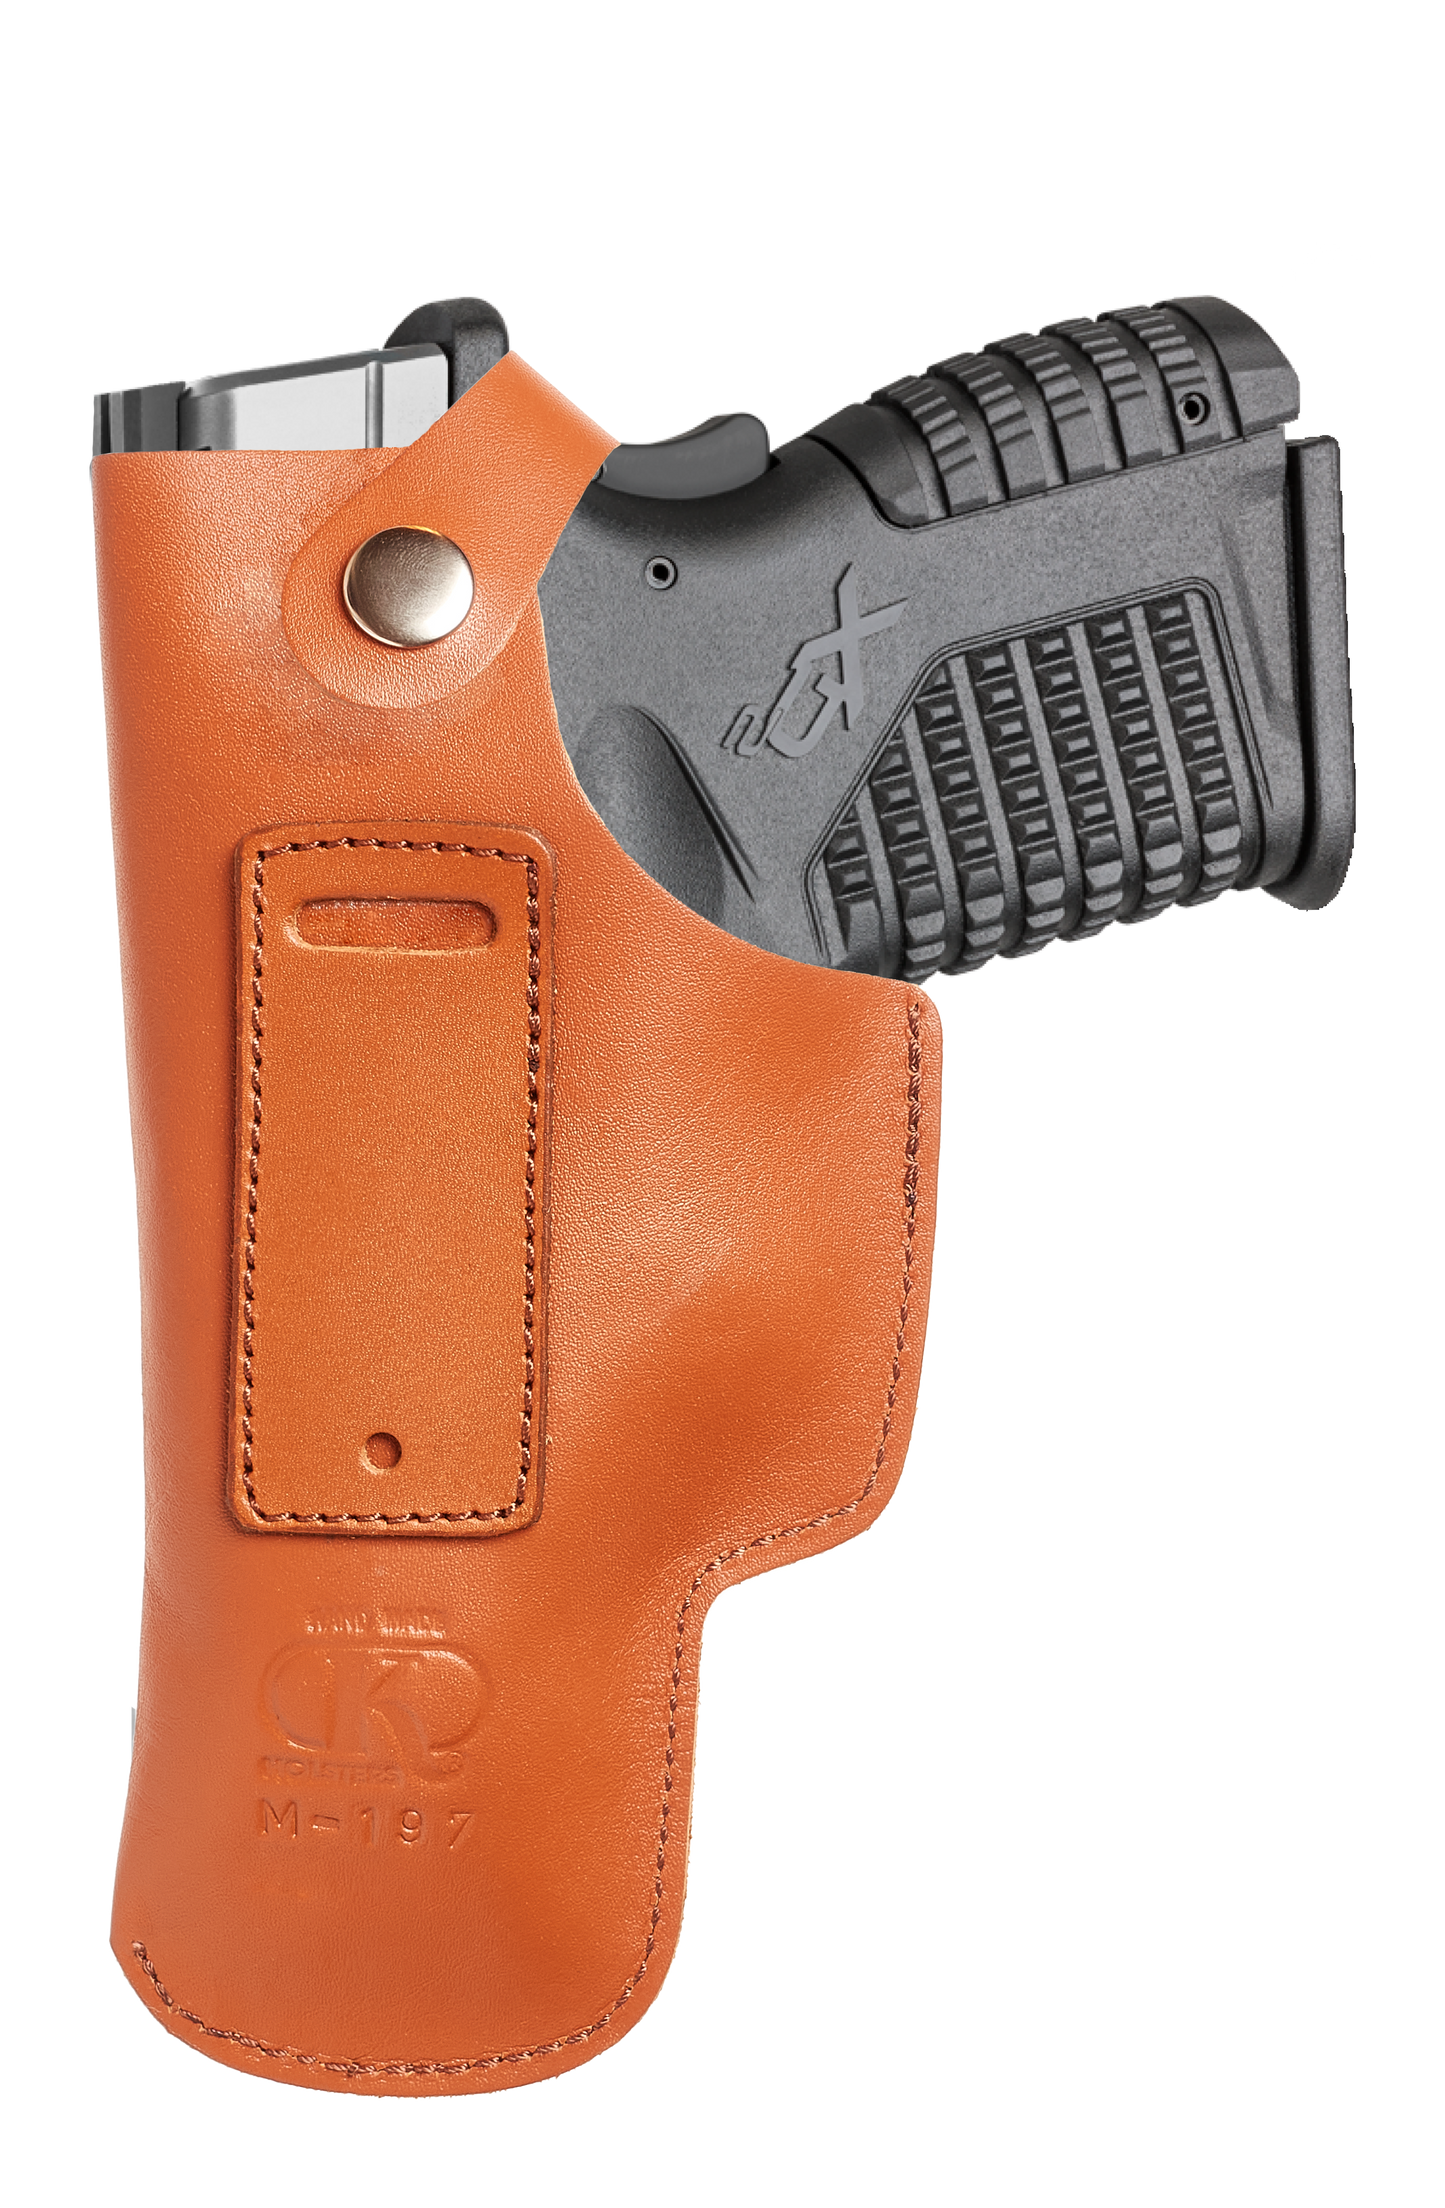 Springfield Armory XD IWB Leather Holster with Belt Clip (KM197)